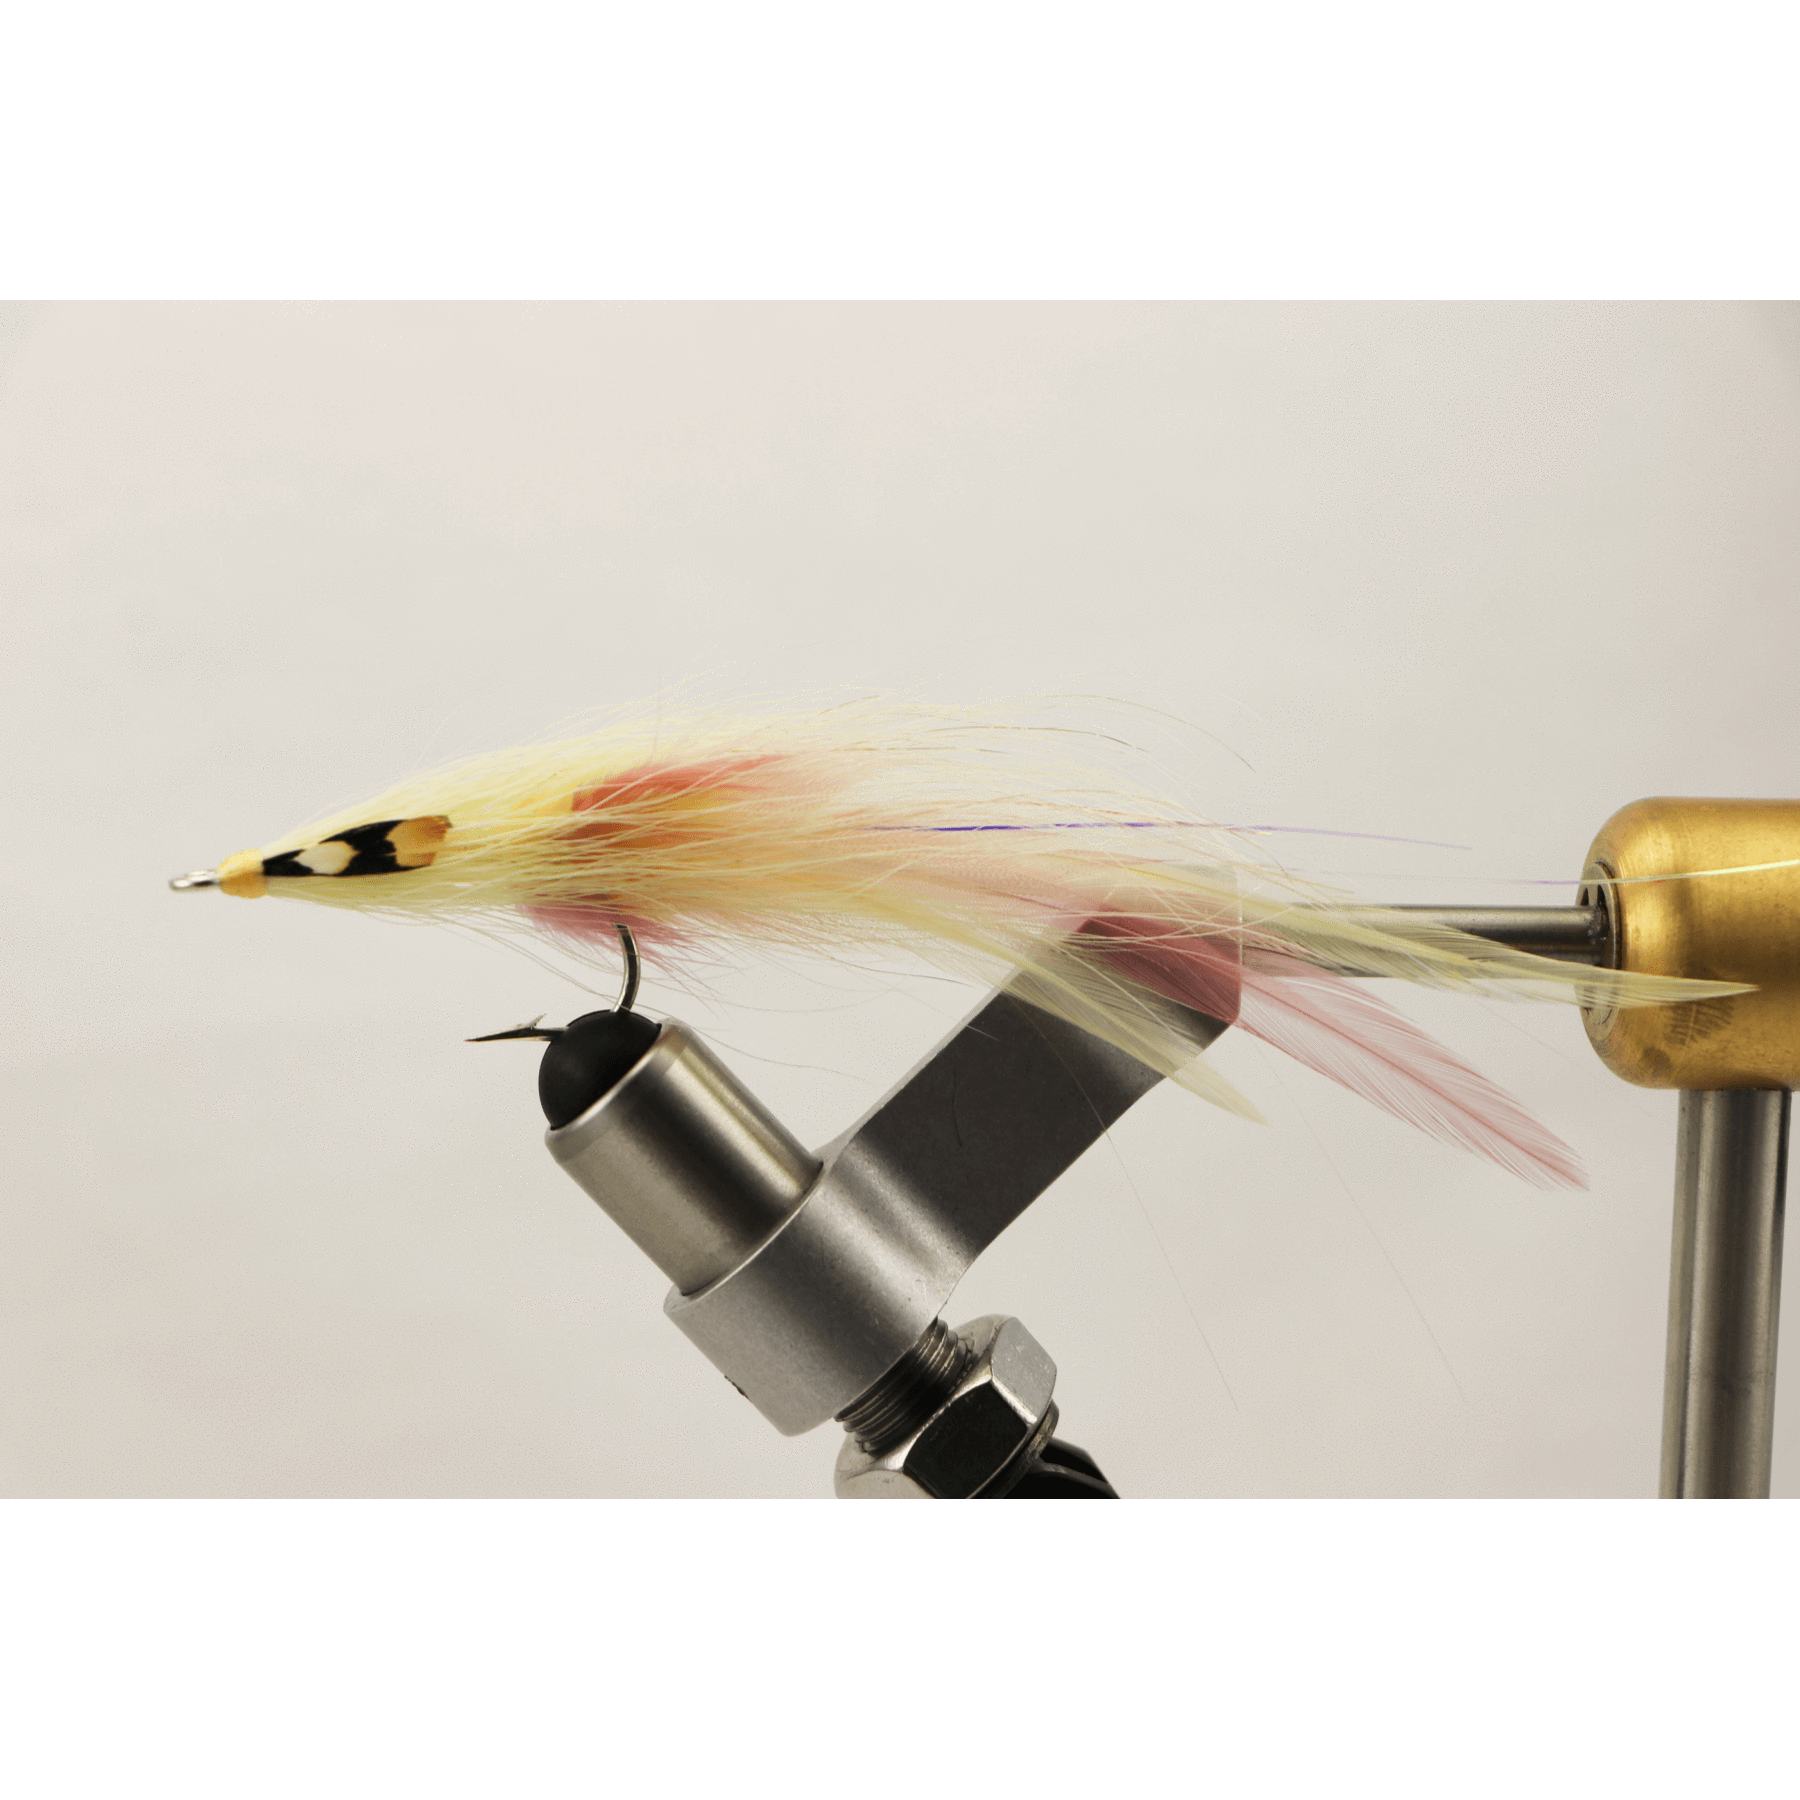 Steve Cook's Ham and Eggs Flatwing Fly